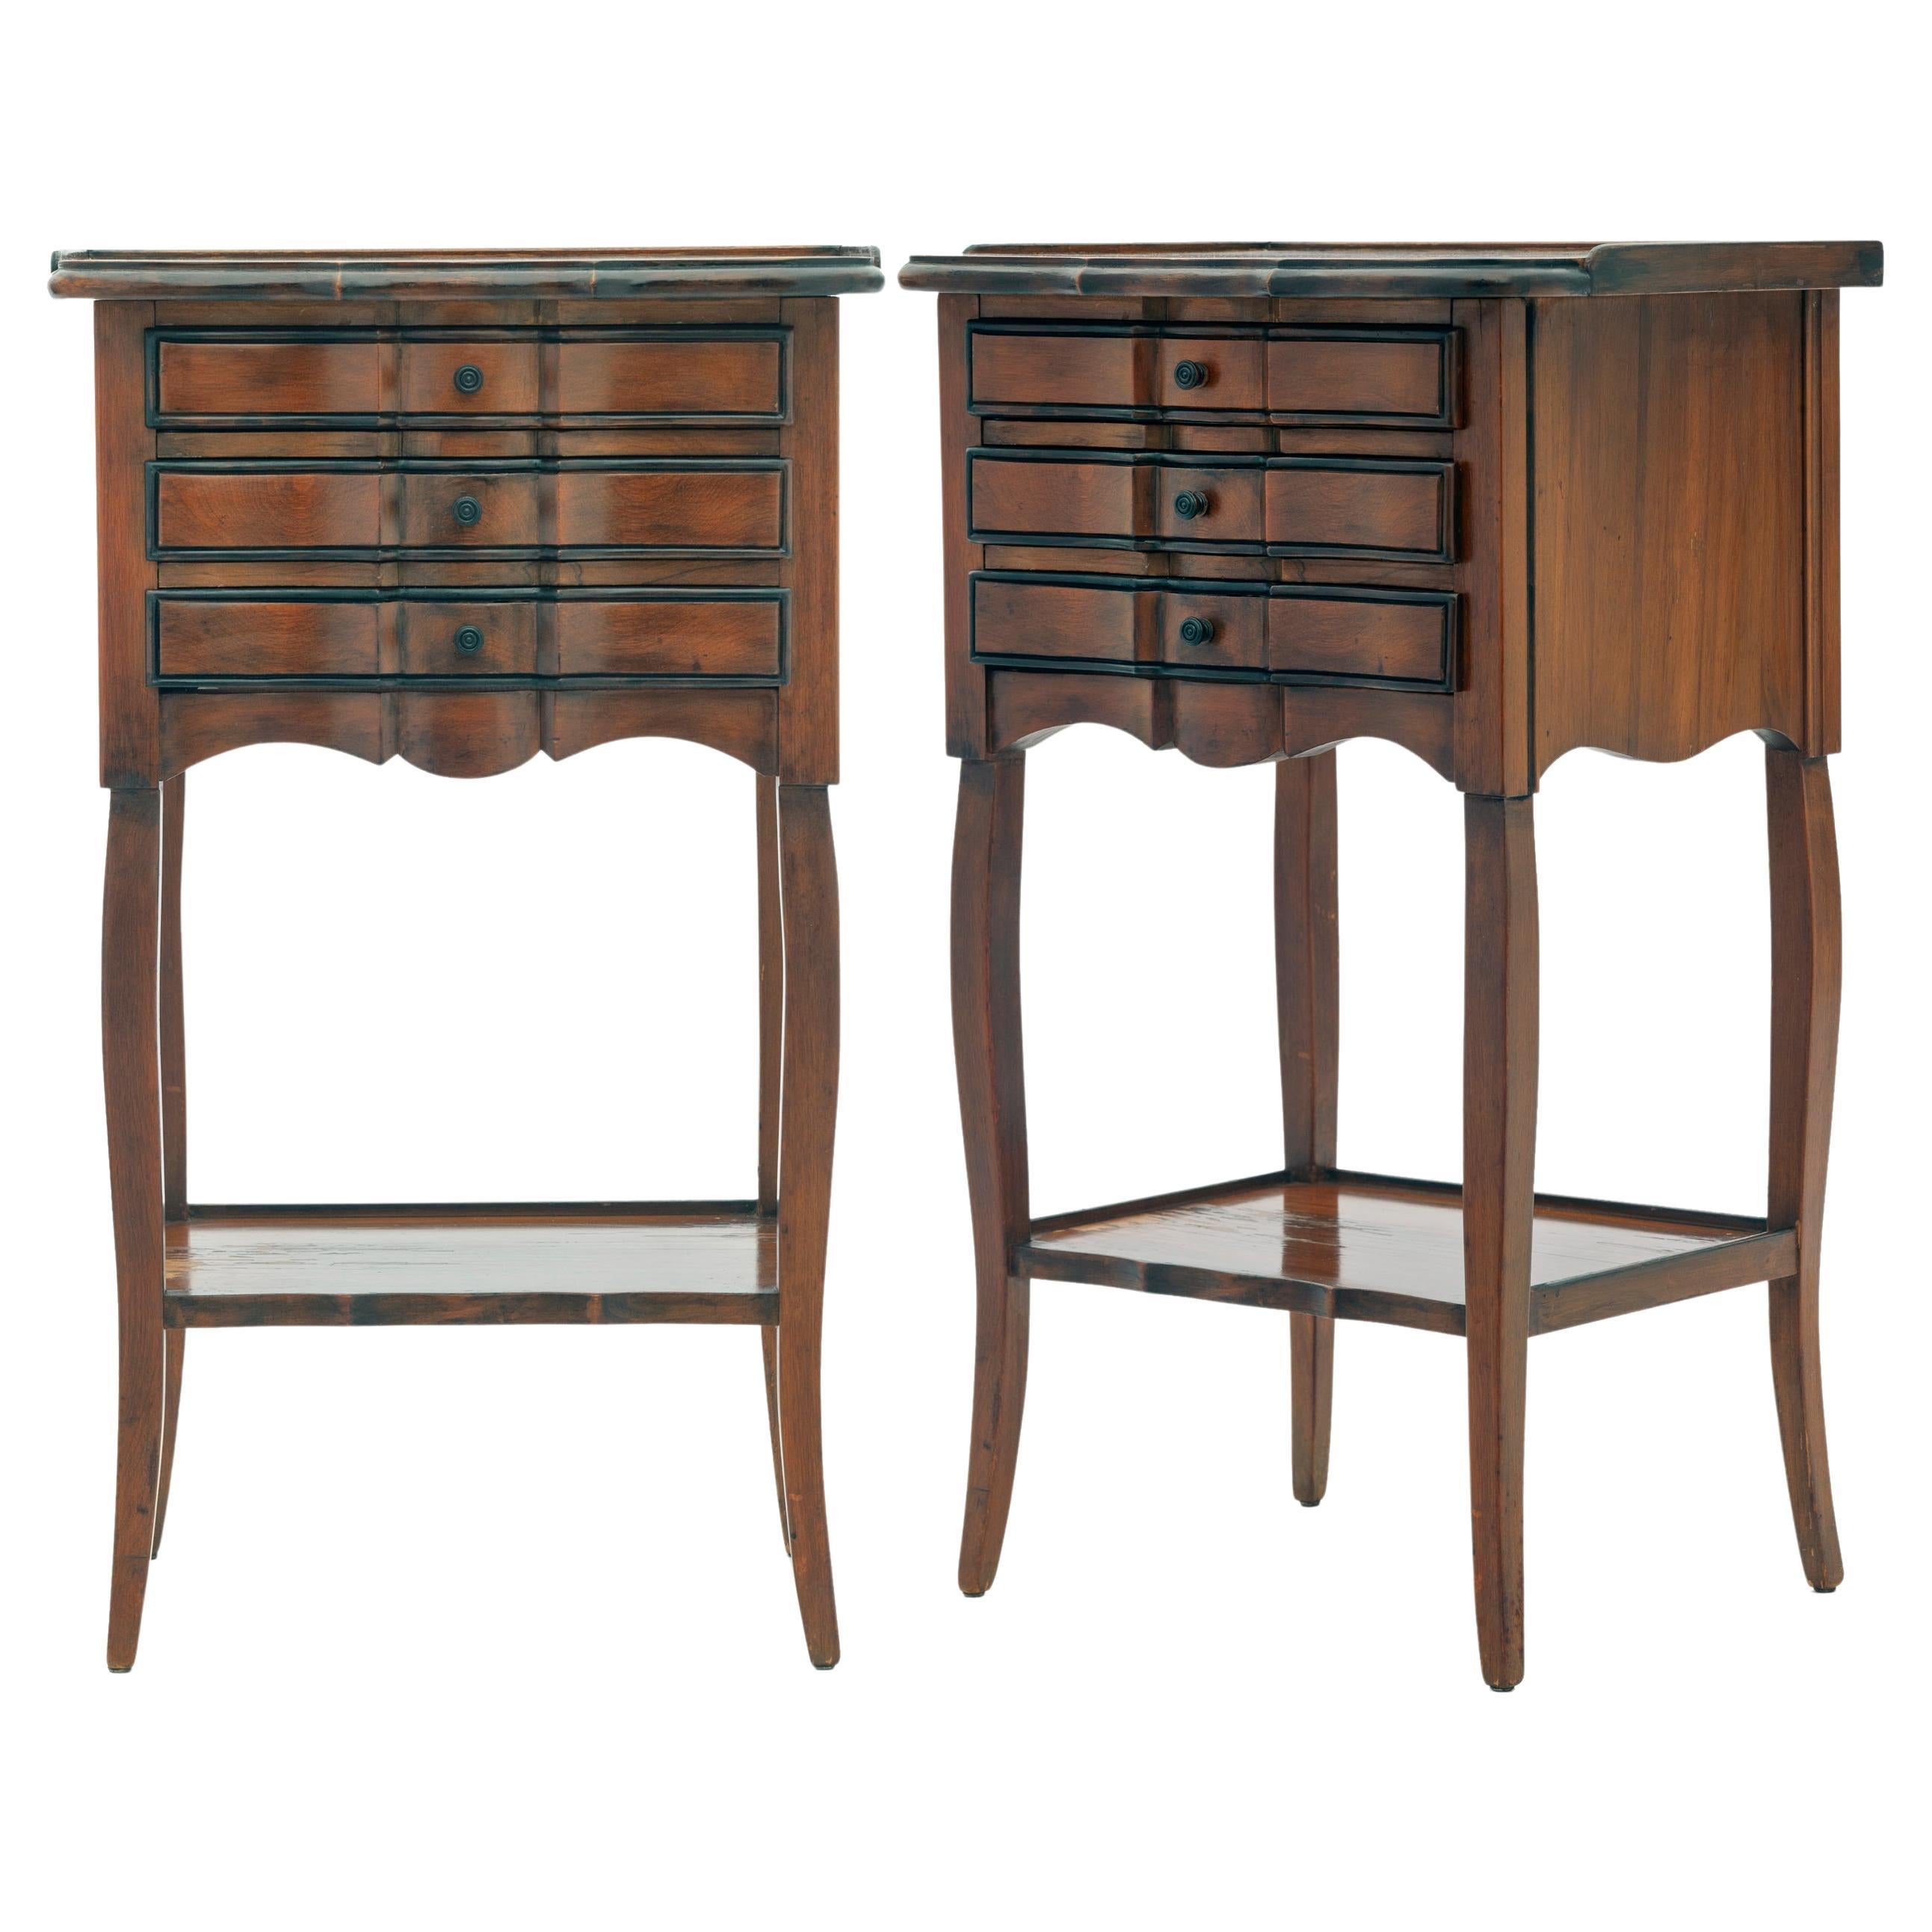 Petite Serpentine Commodes/Nightstands; a pair